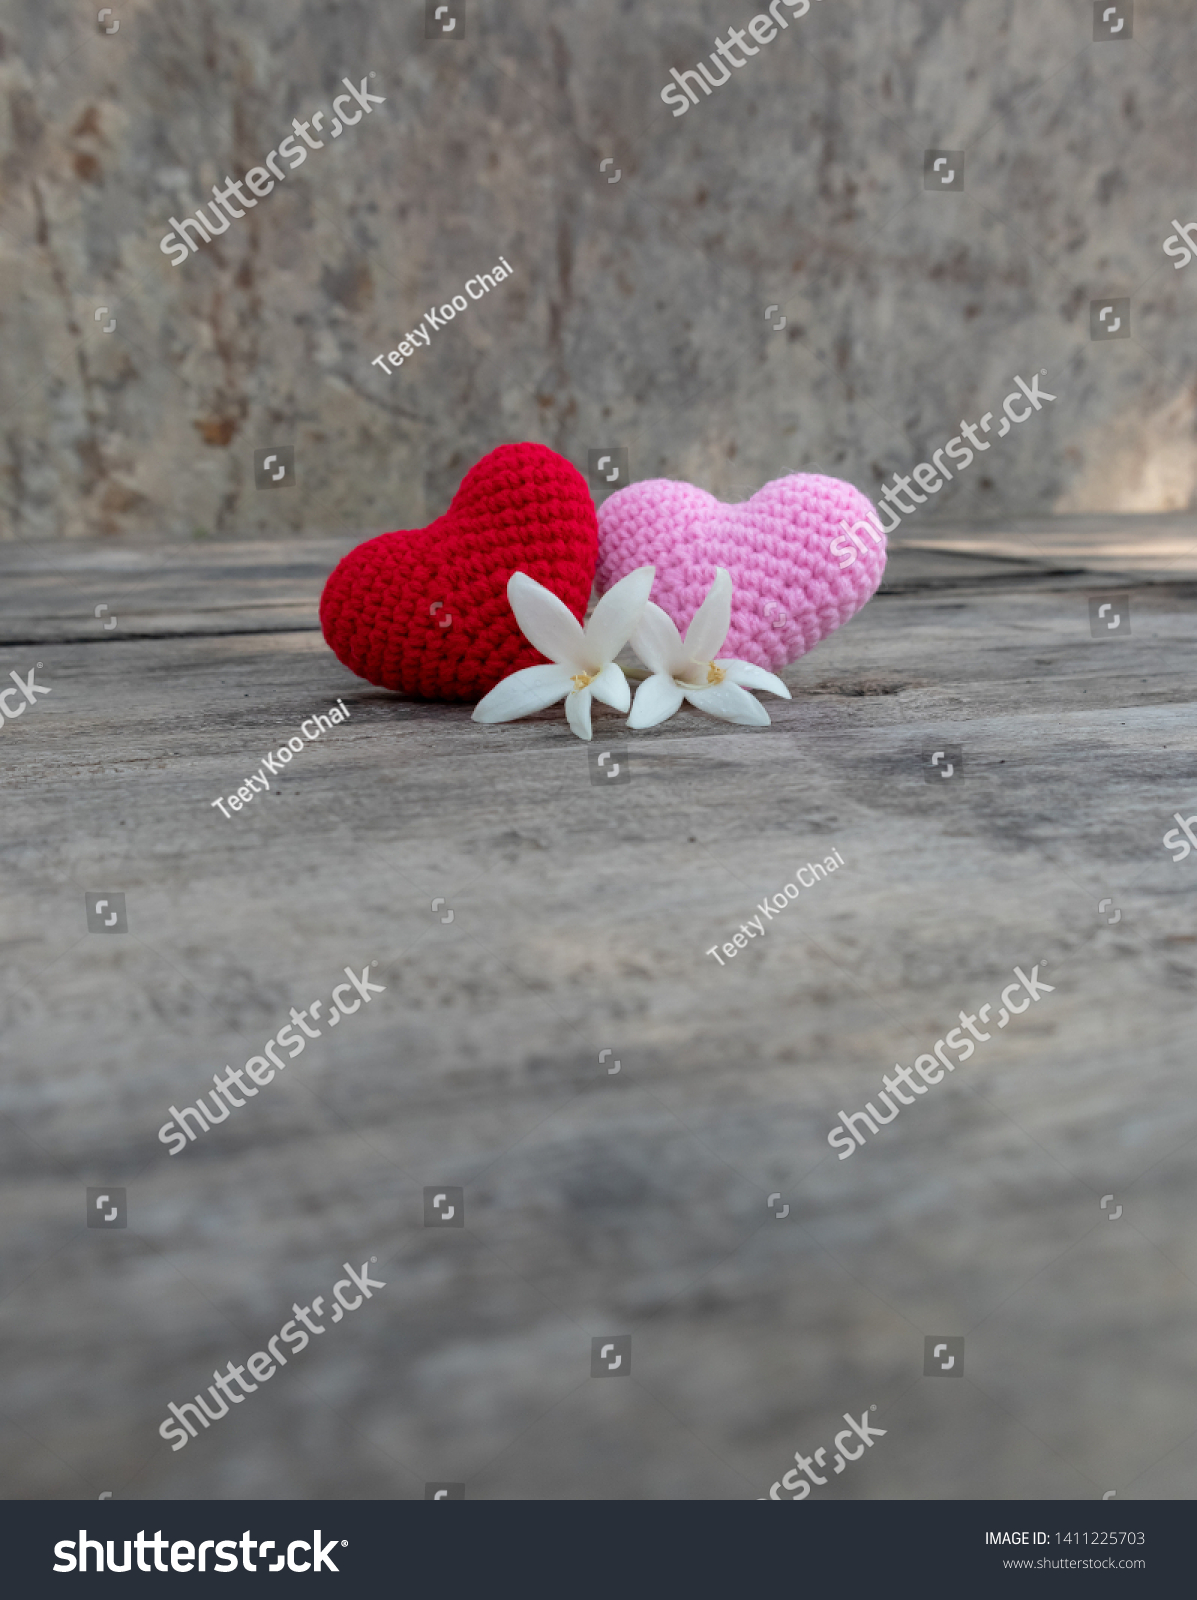 Knitting red and pink hearts with white Millingtonia on the rough wooden table. The background of rock wall with sun light. Copy space for editing #1411225703